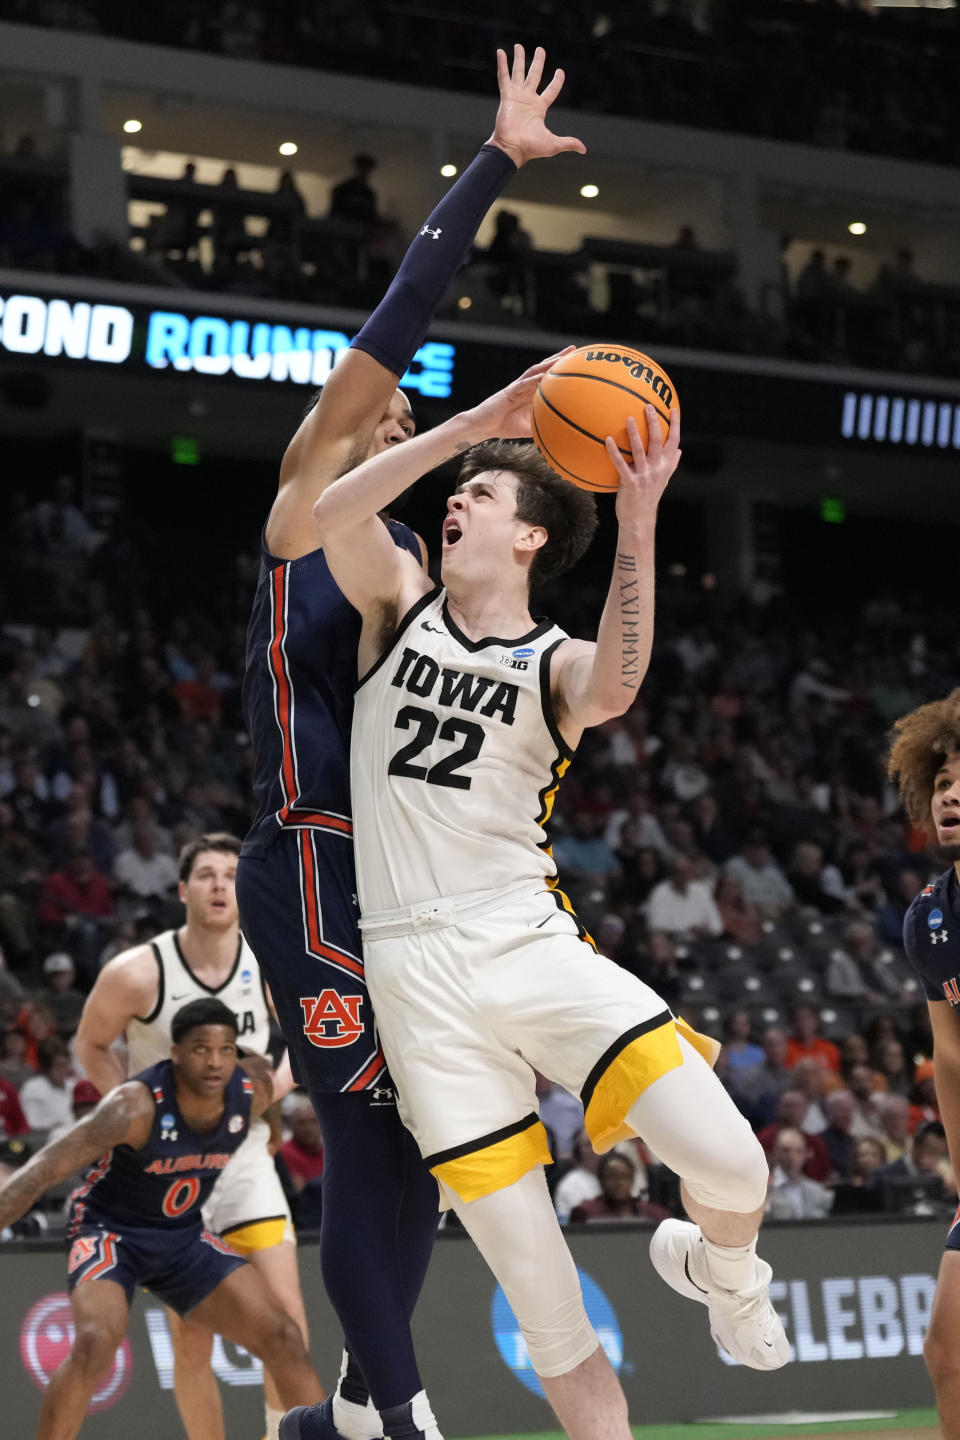 Iowa forward Patrick McCaffery (22) shoots against Auburn during the first half of a first-round college basketball game in the men's NCAA Tournament in Birmingham, Ala., Thursday, March 16, 2023. (AP Photo/Rogelio V. Solis)